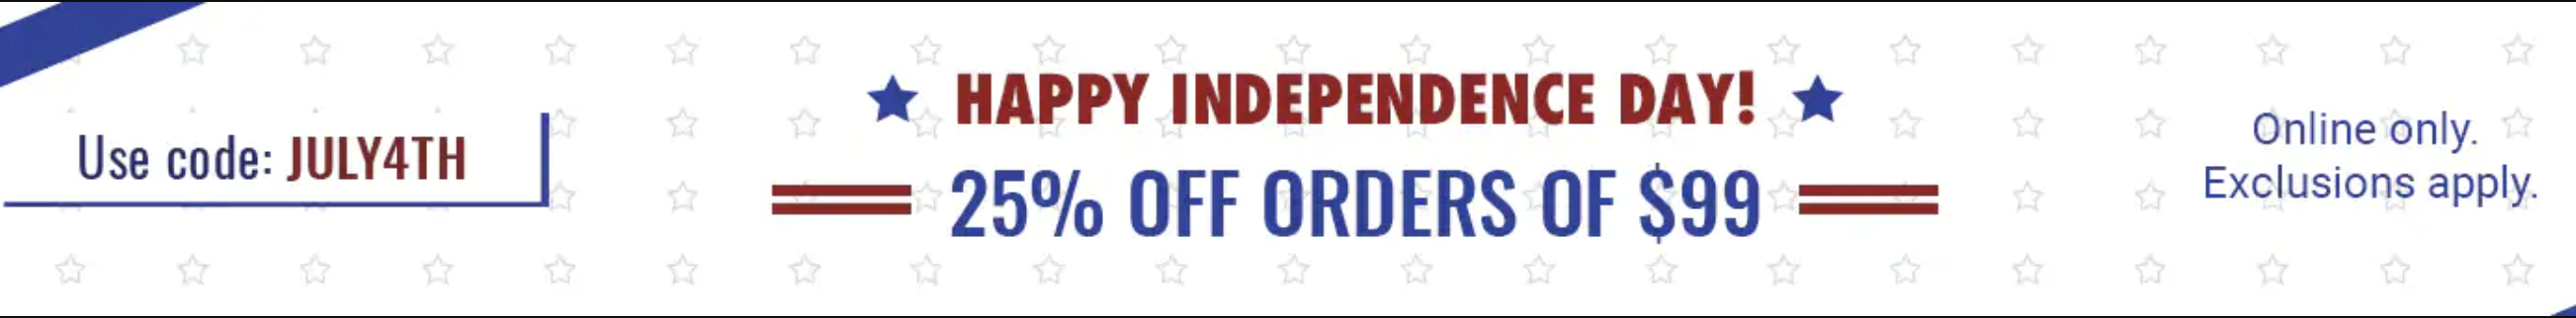 champs sports fourth of july 2019 sale banner